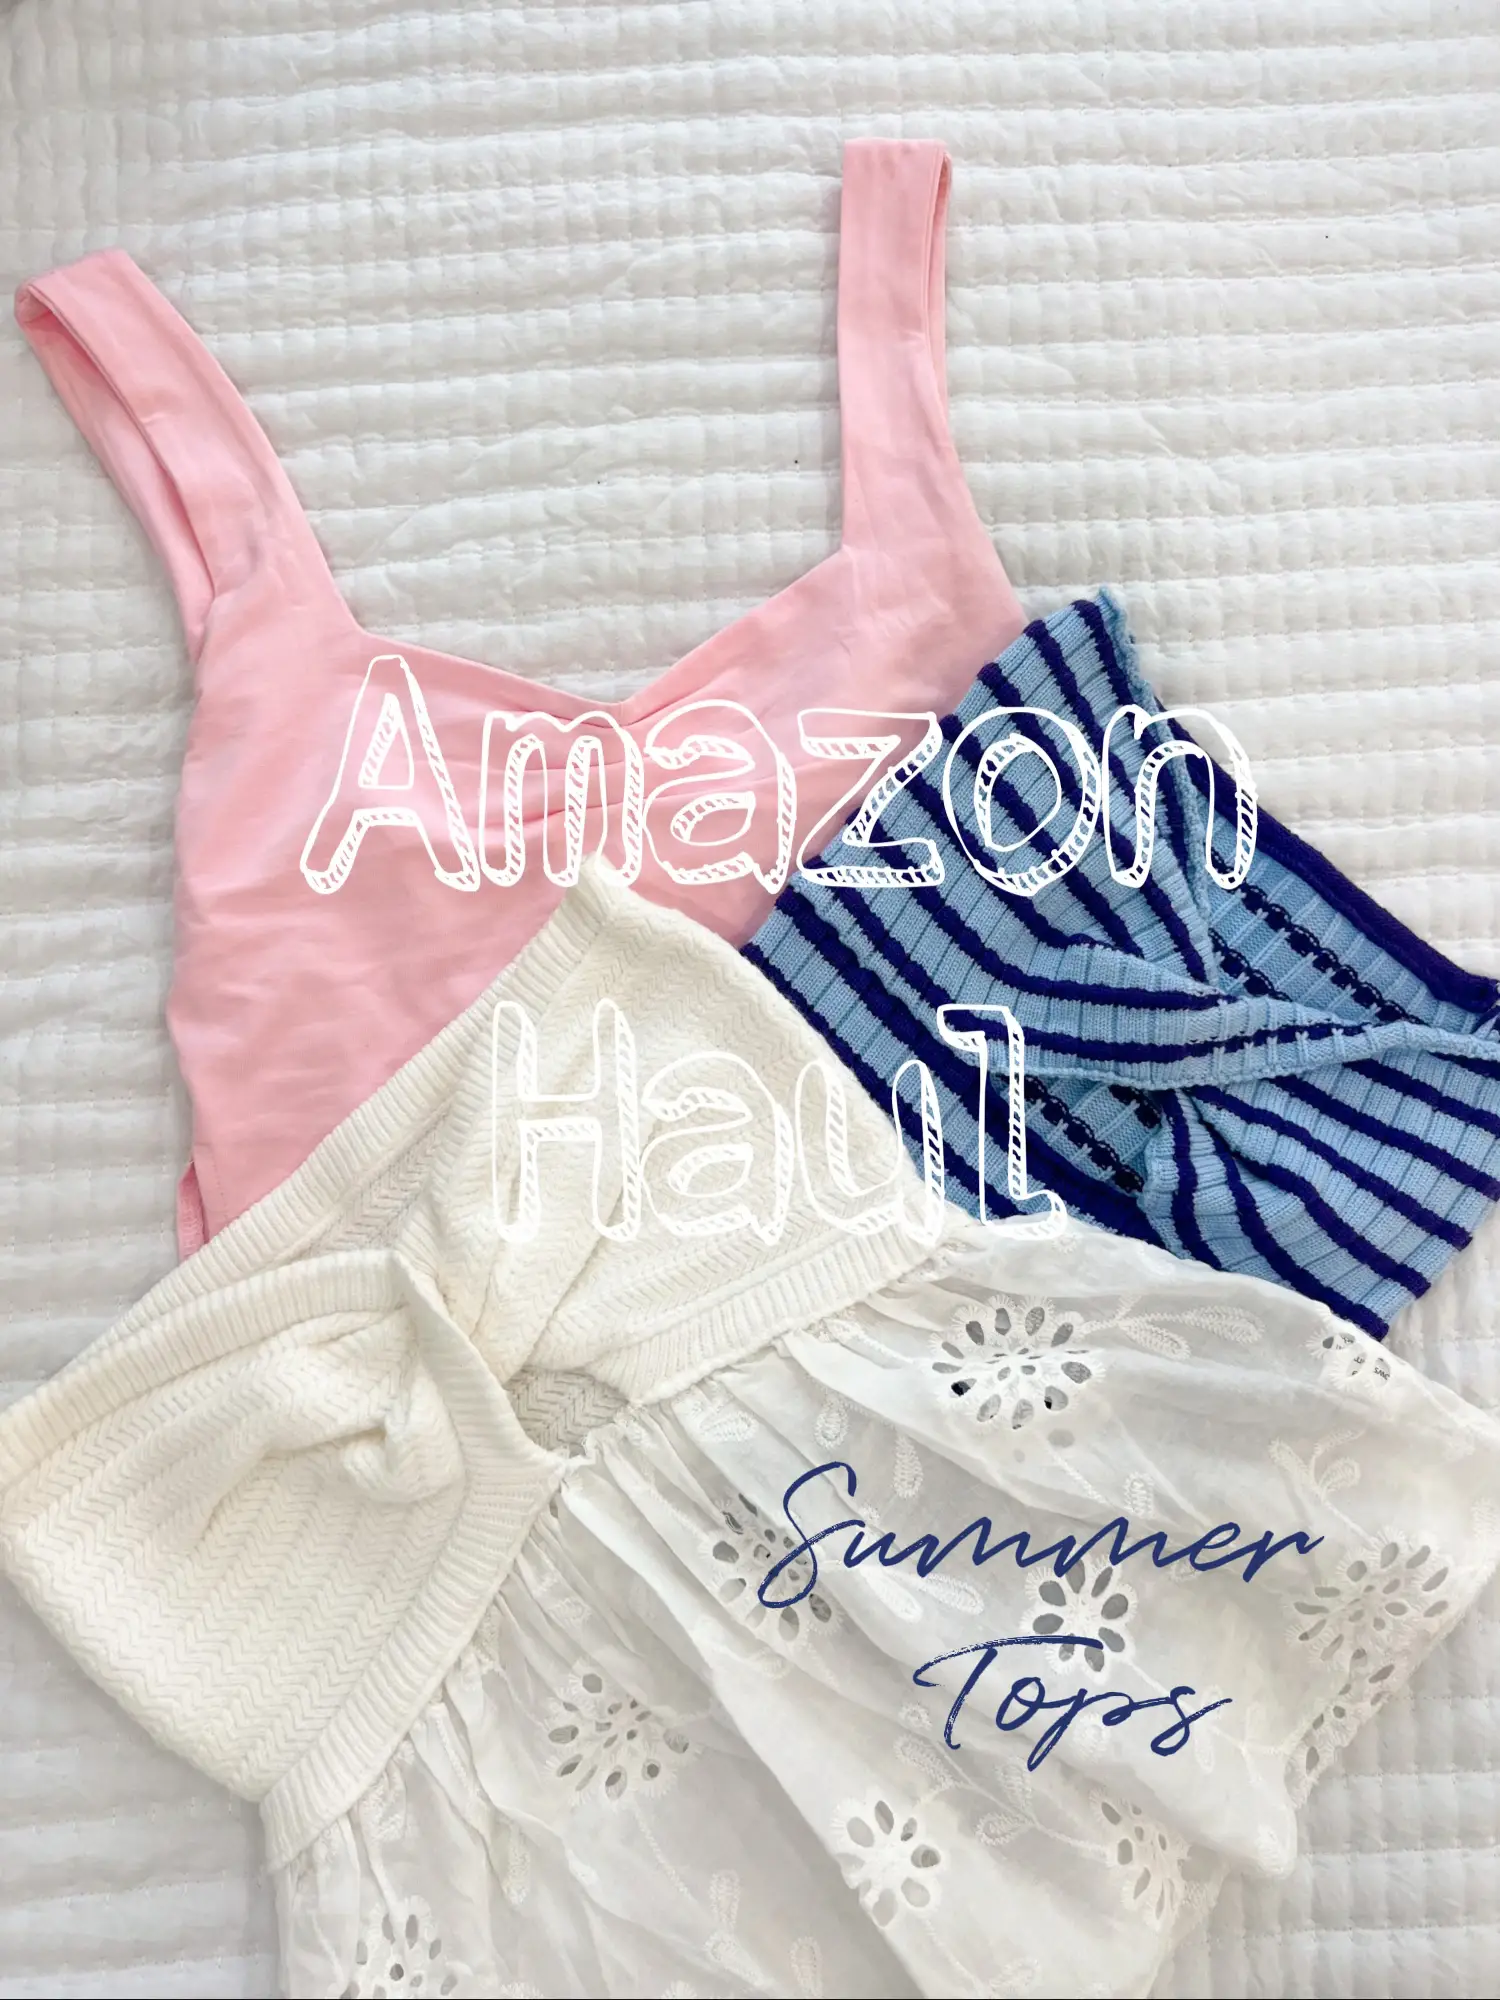 Beyond Yoga T-Back Luxe Bra in Pastel Gingham Size XS - $32 - From Rachael